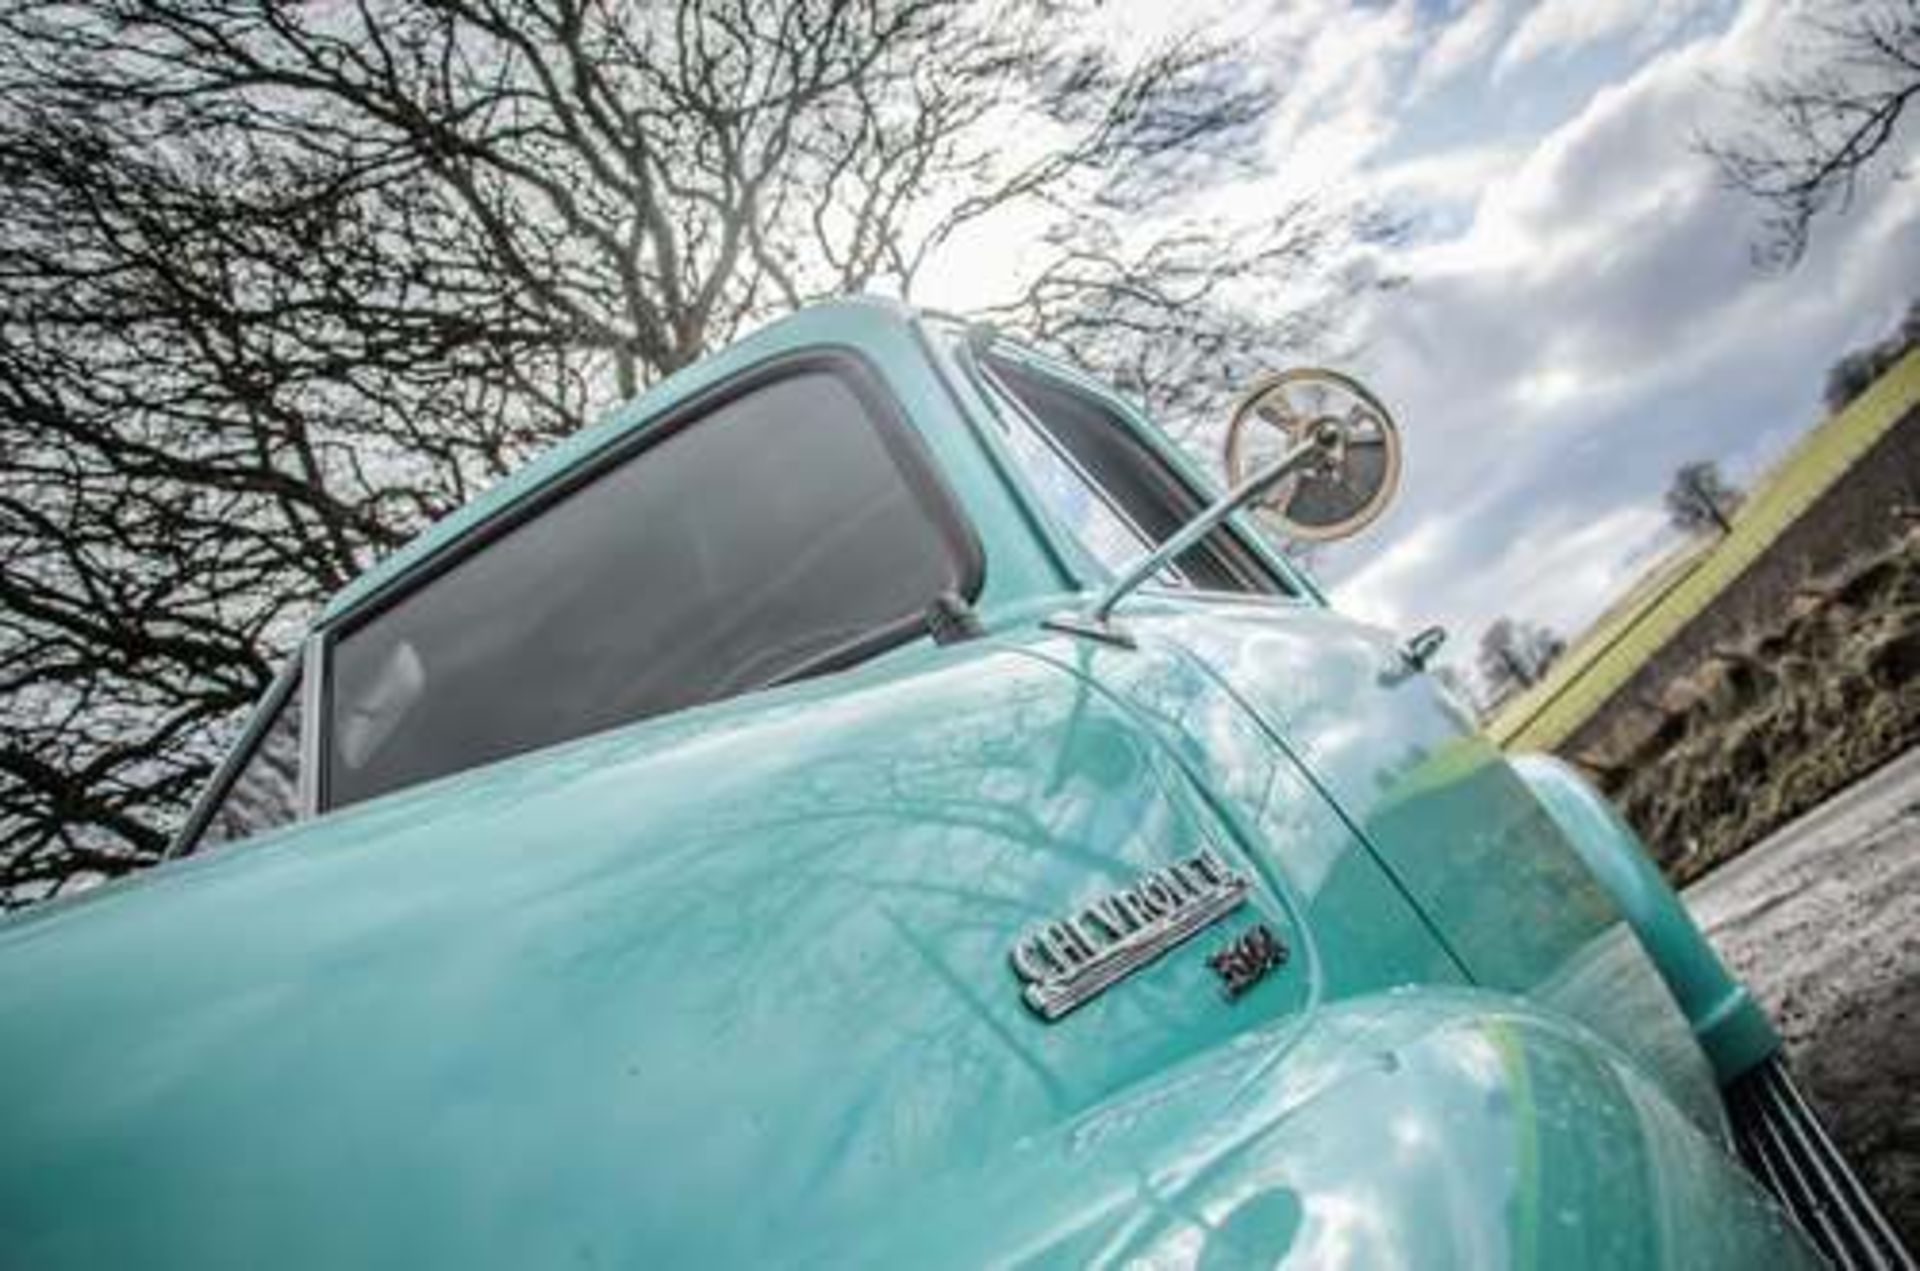 CHEVROLET 3100 PICK UP - 3500cc - Image 6 of 16